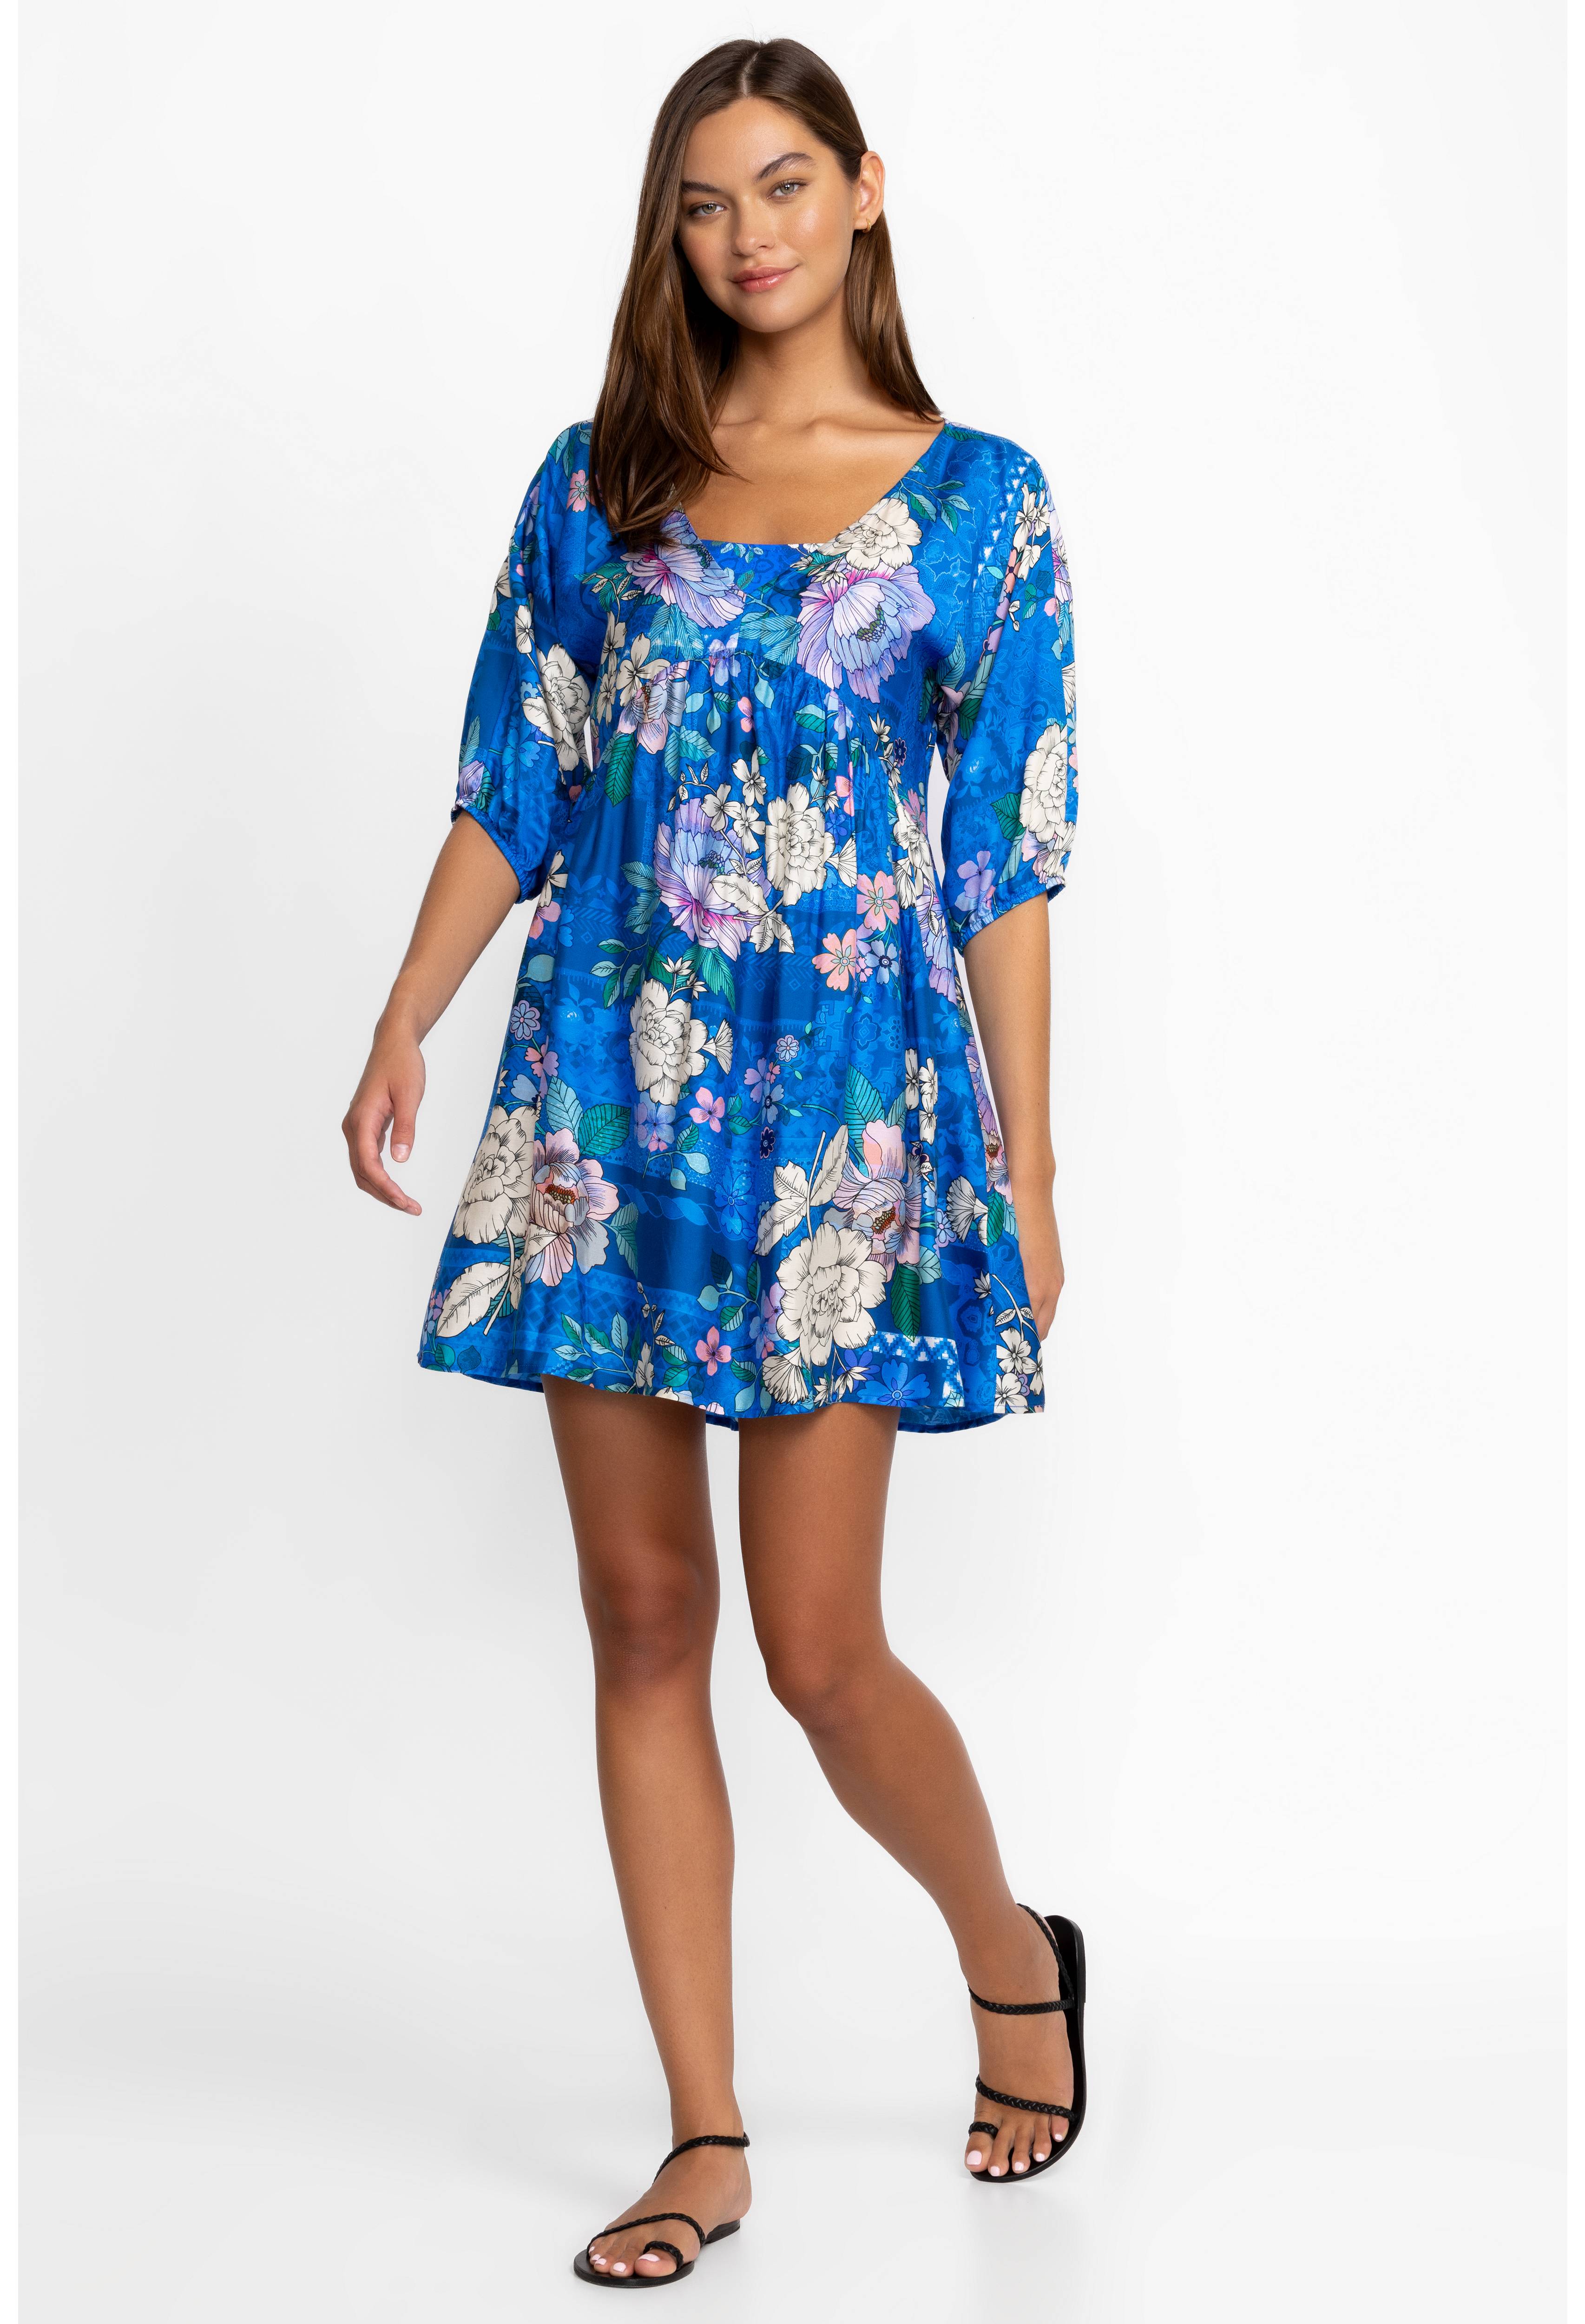 BLUE DOVE A-LINE COVERUP, , large image number 1